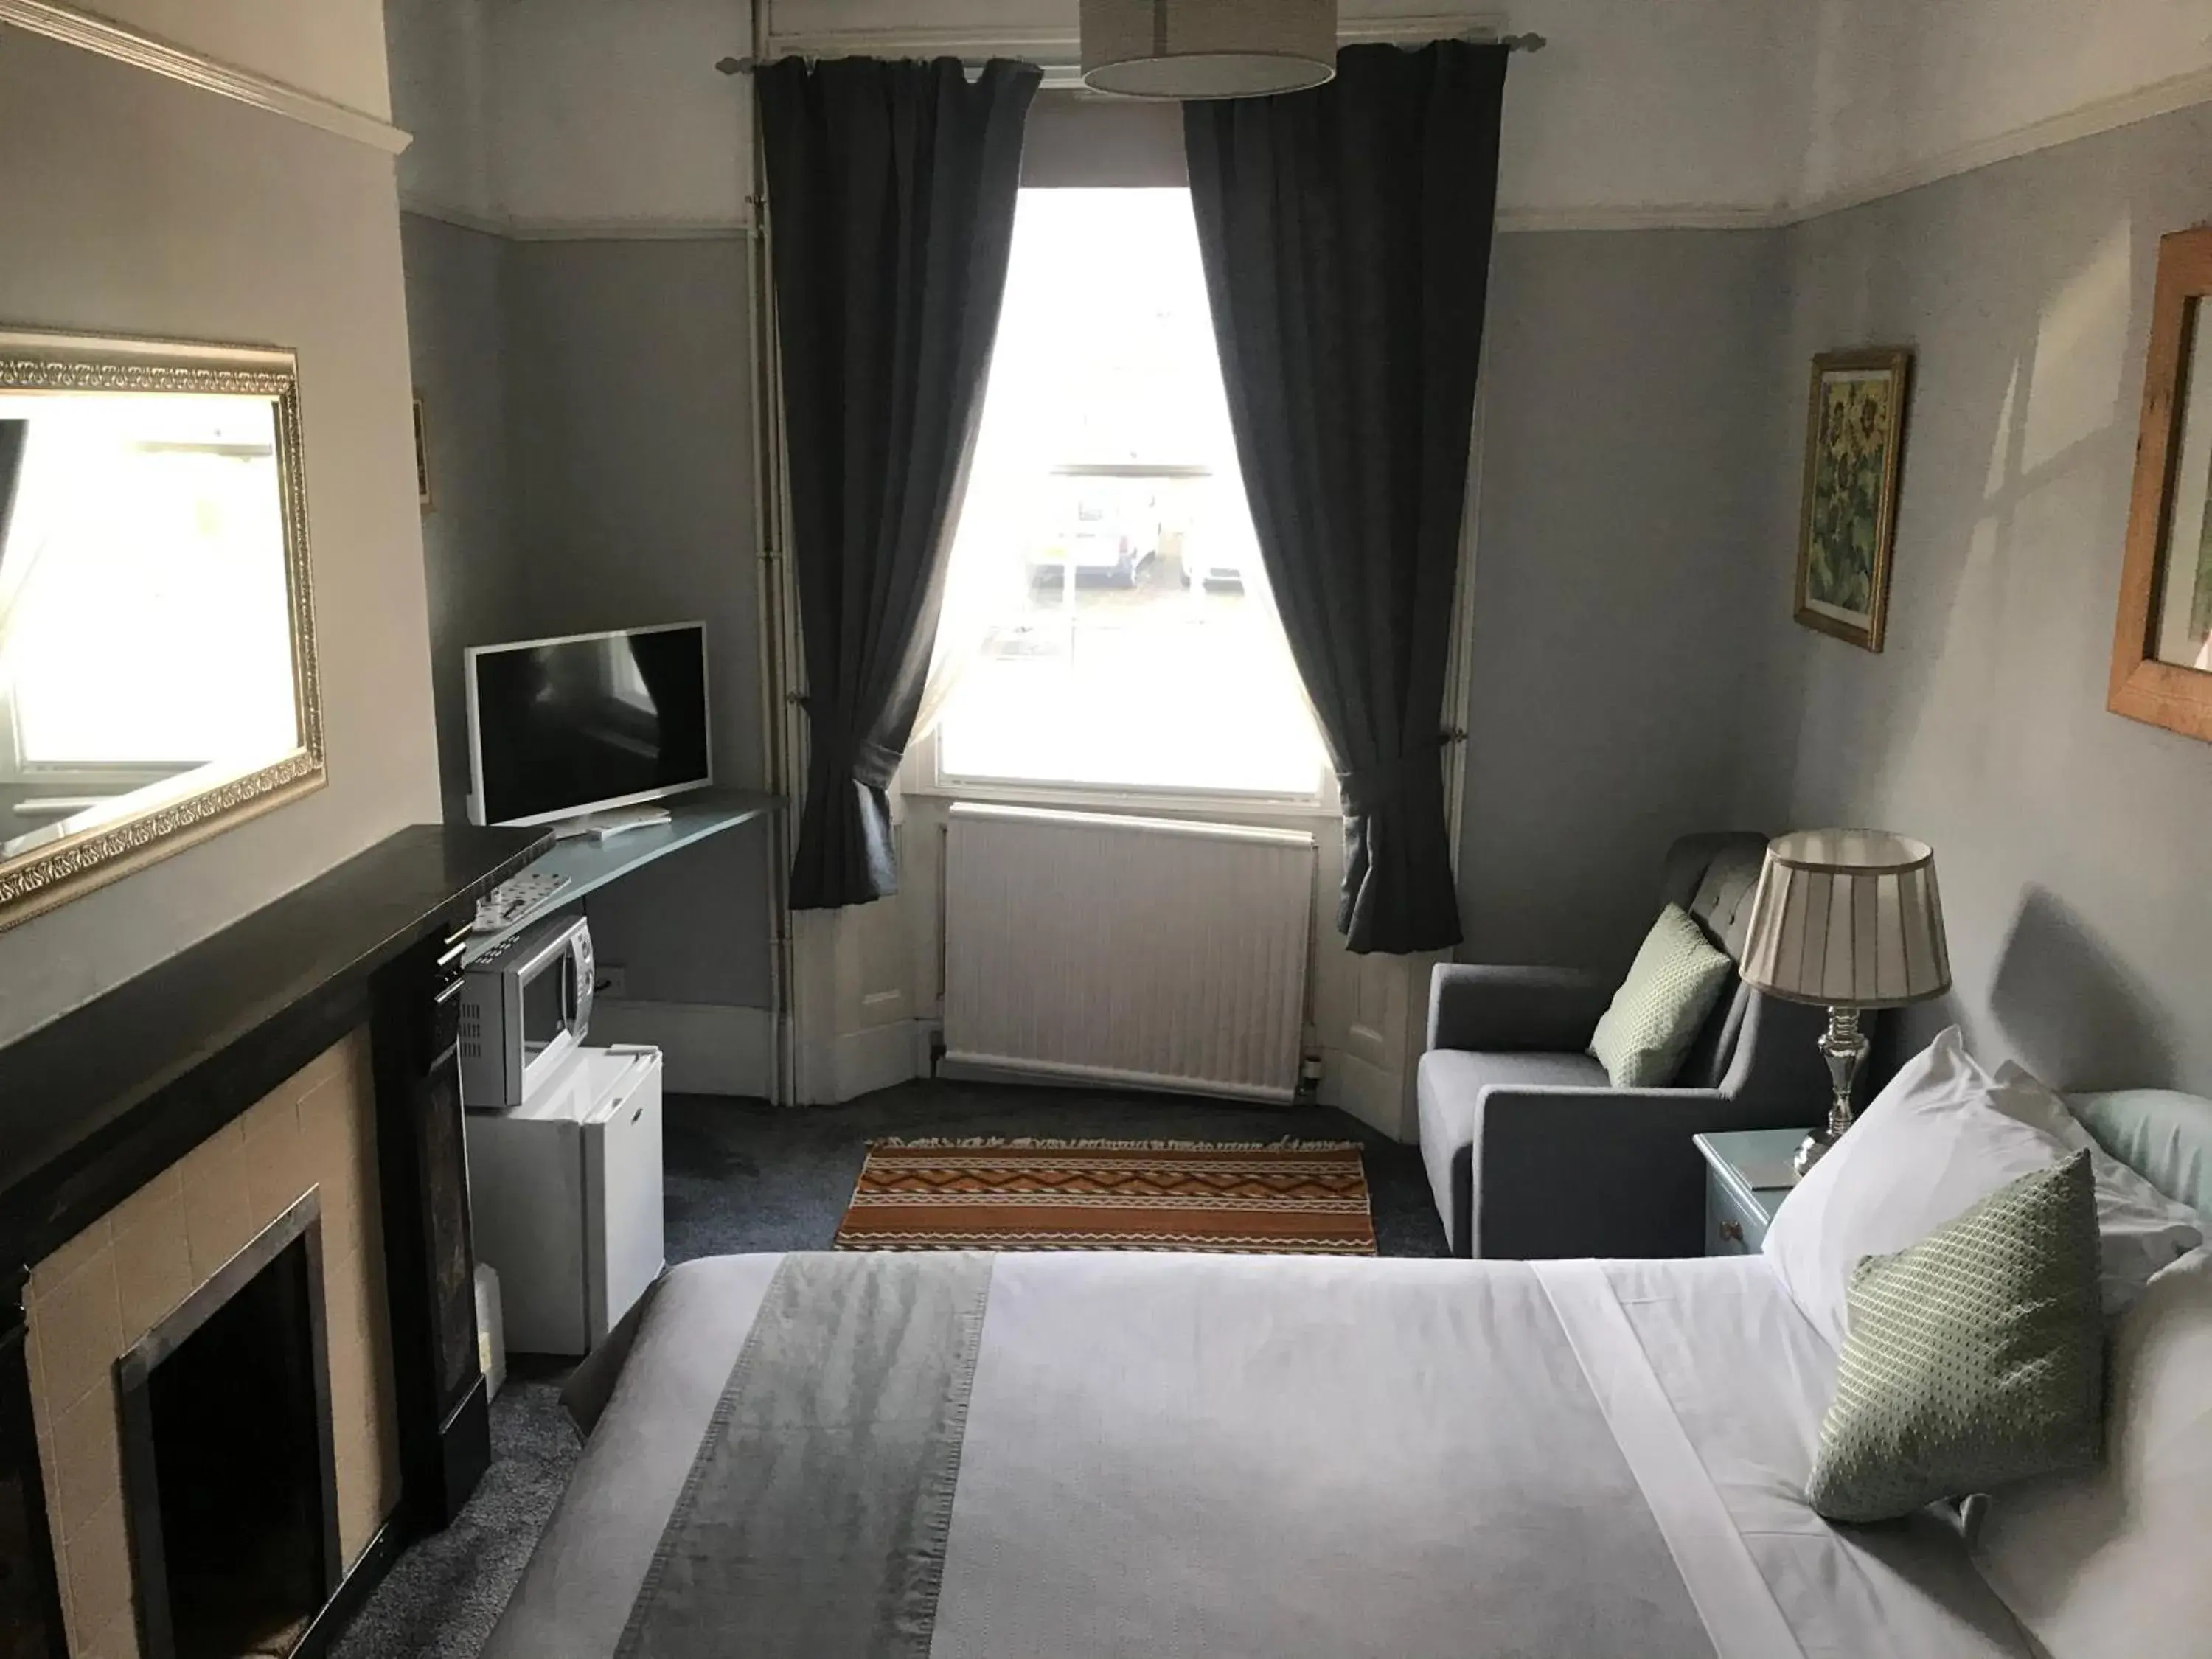 Deluxe Double Room with Shower - single occupancy in The Red House Guest House